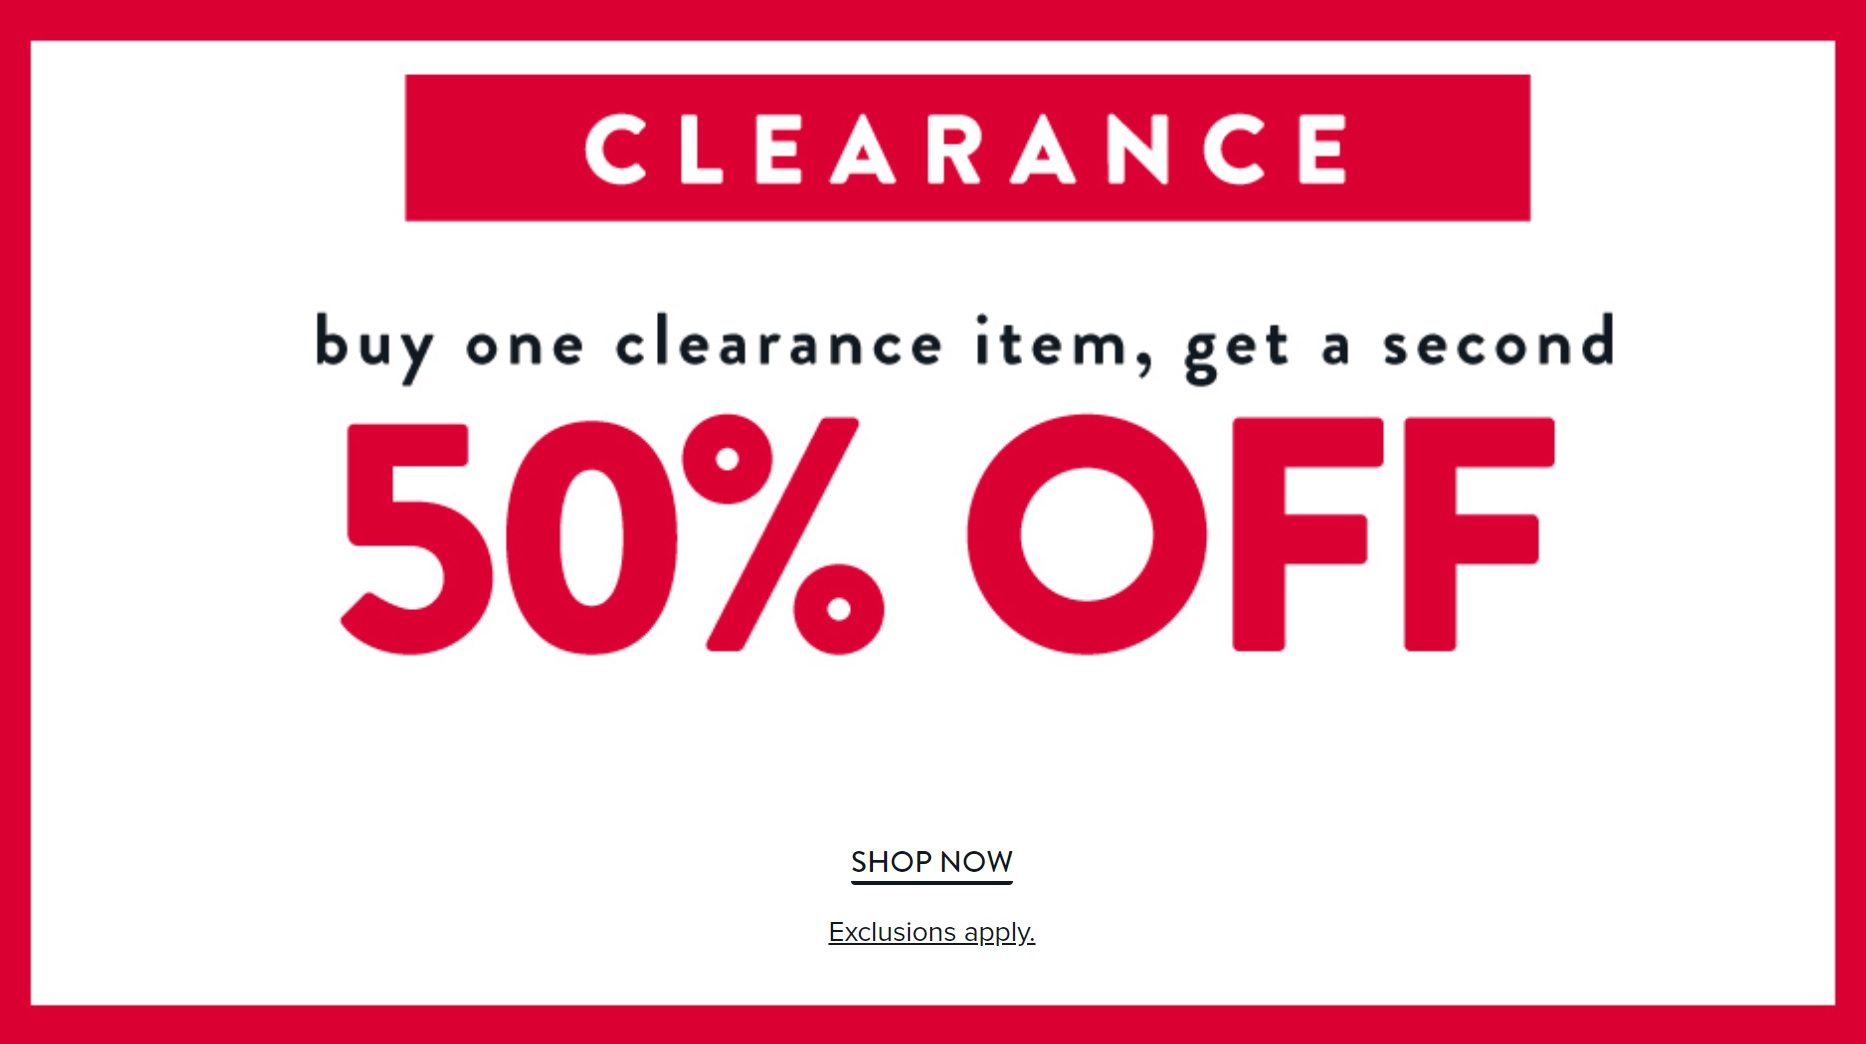 Famous Footwear Canada Sale: Buy One Clearance Item & Get Second for 50